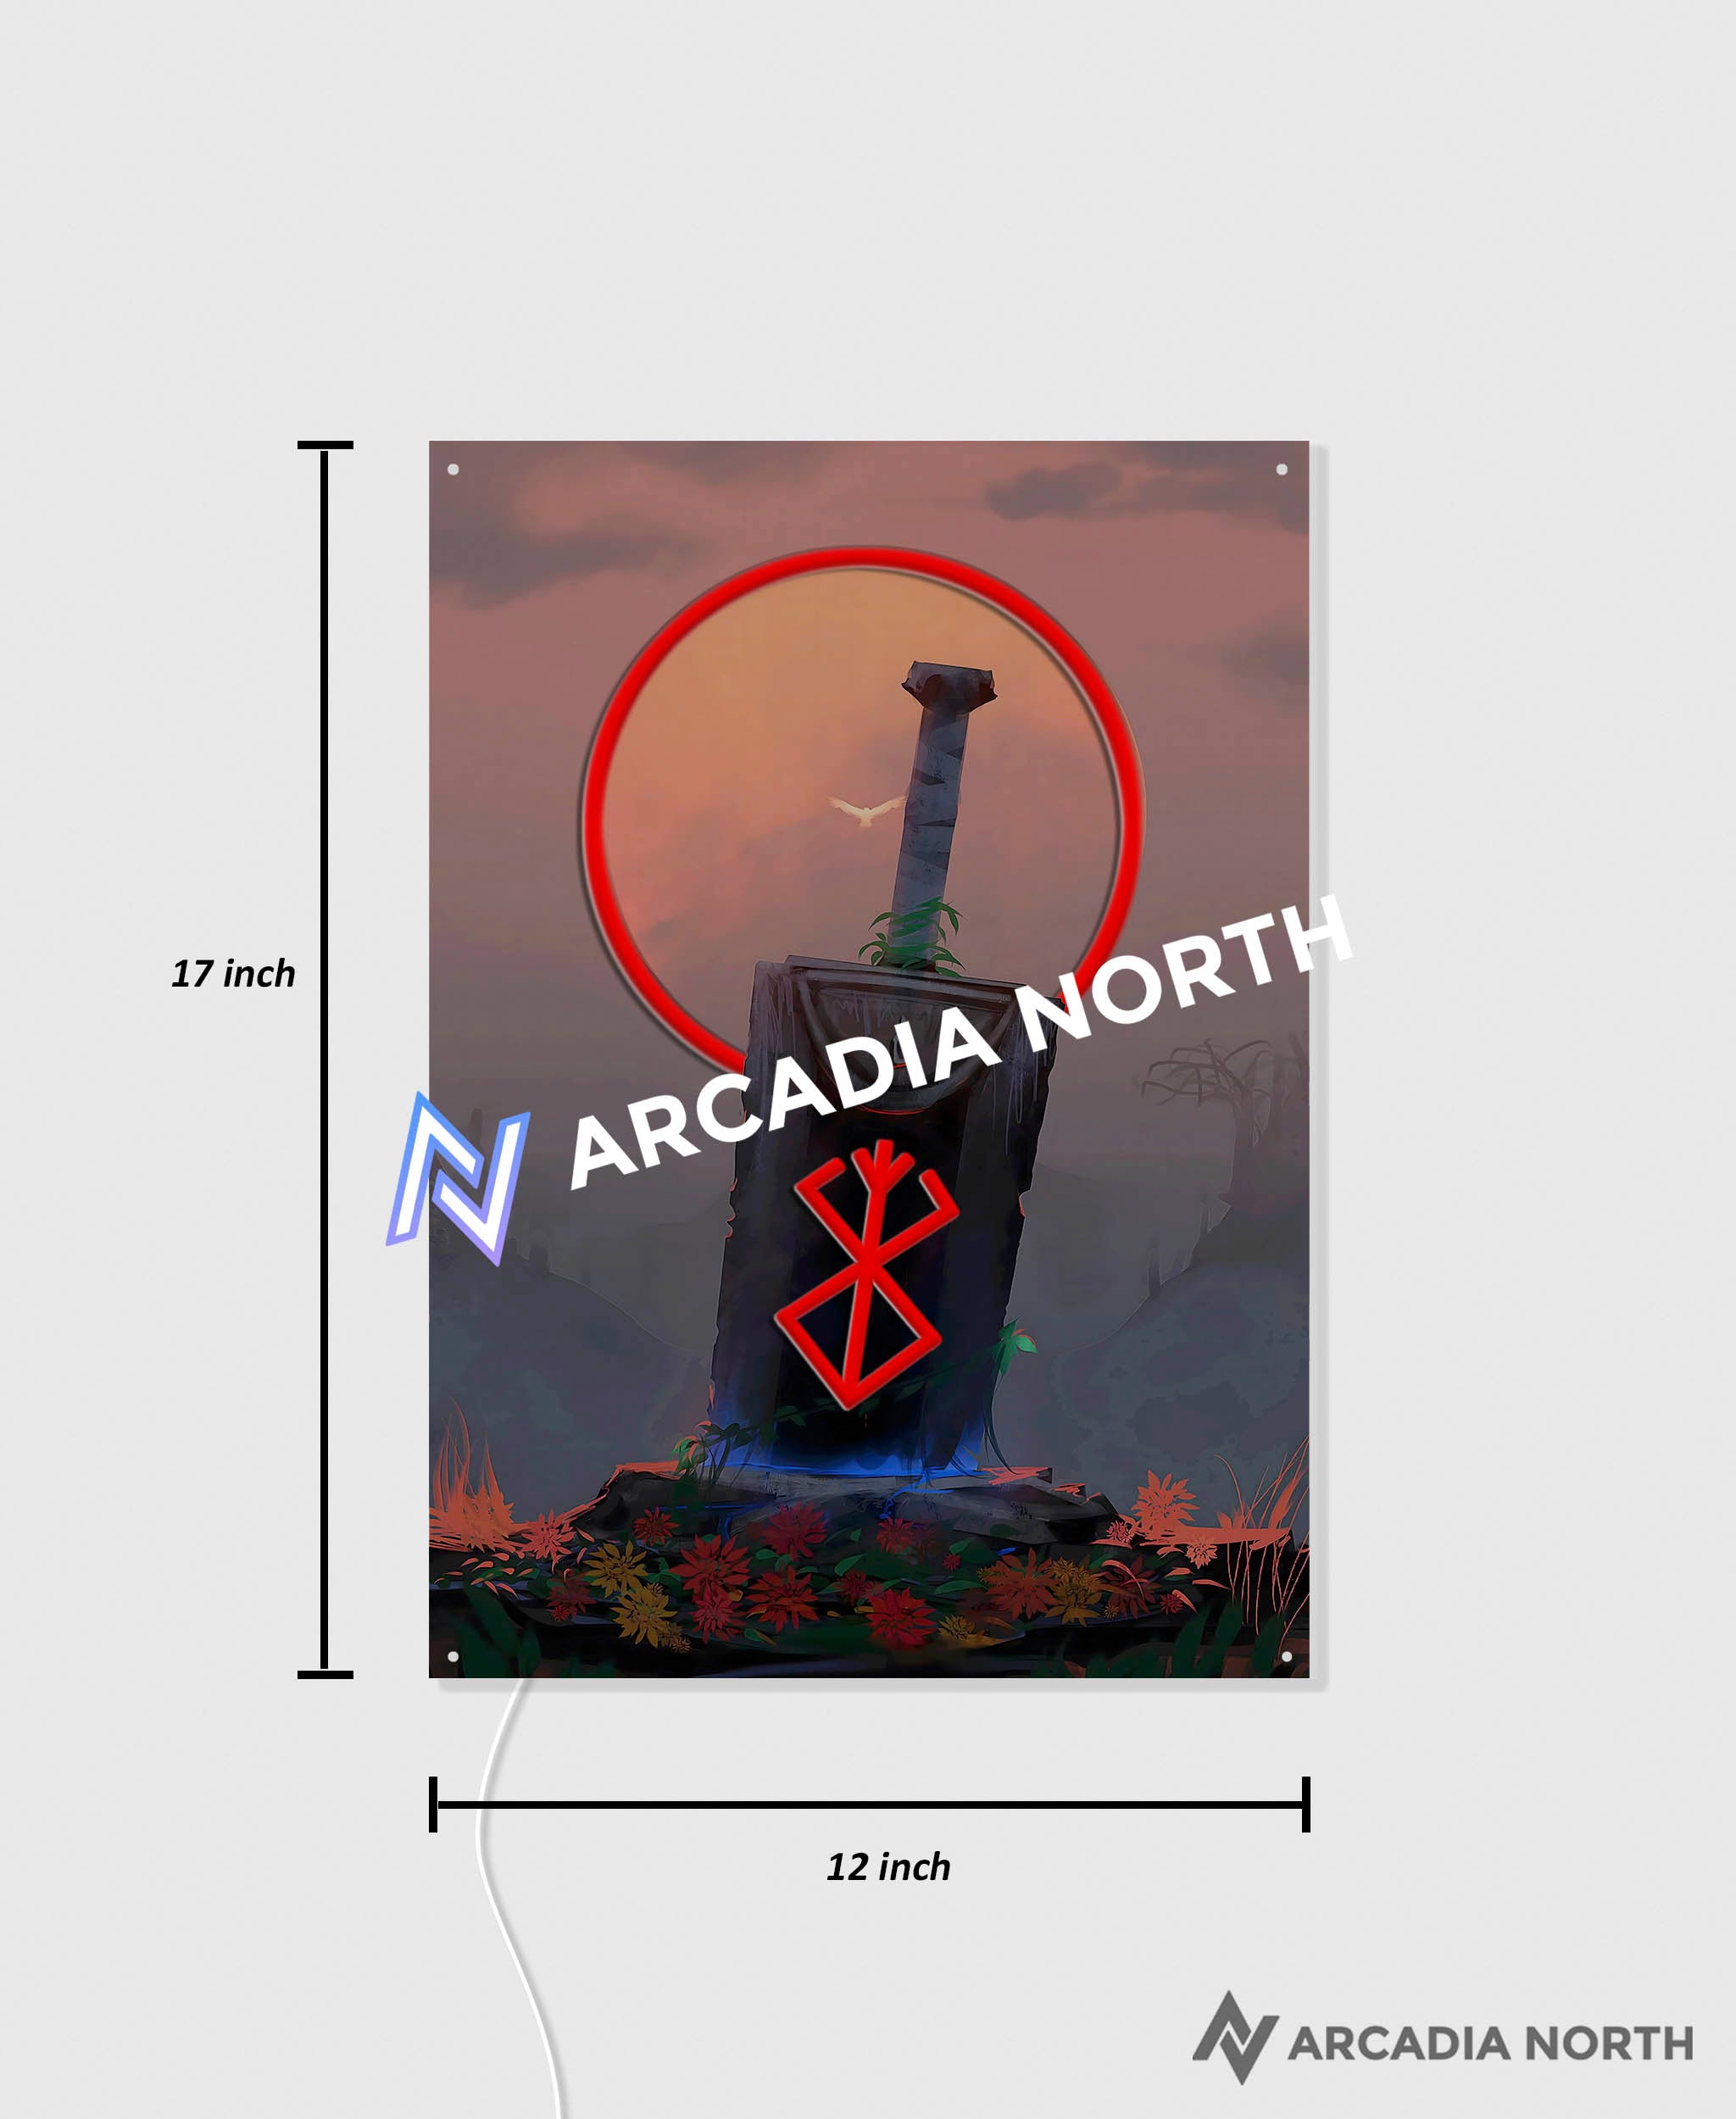 Arcadia North AURALIGHT Original LED Poster featuring the anime Berserk with Guts' Dragon Slayer sword and Brand of Sacrifice illuminated by glowing neon LED lights and UV-printed on acrylic